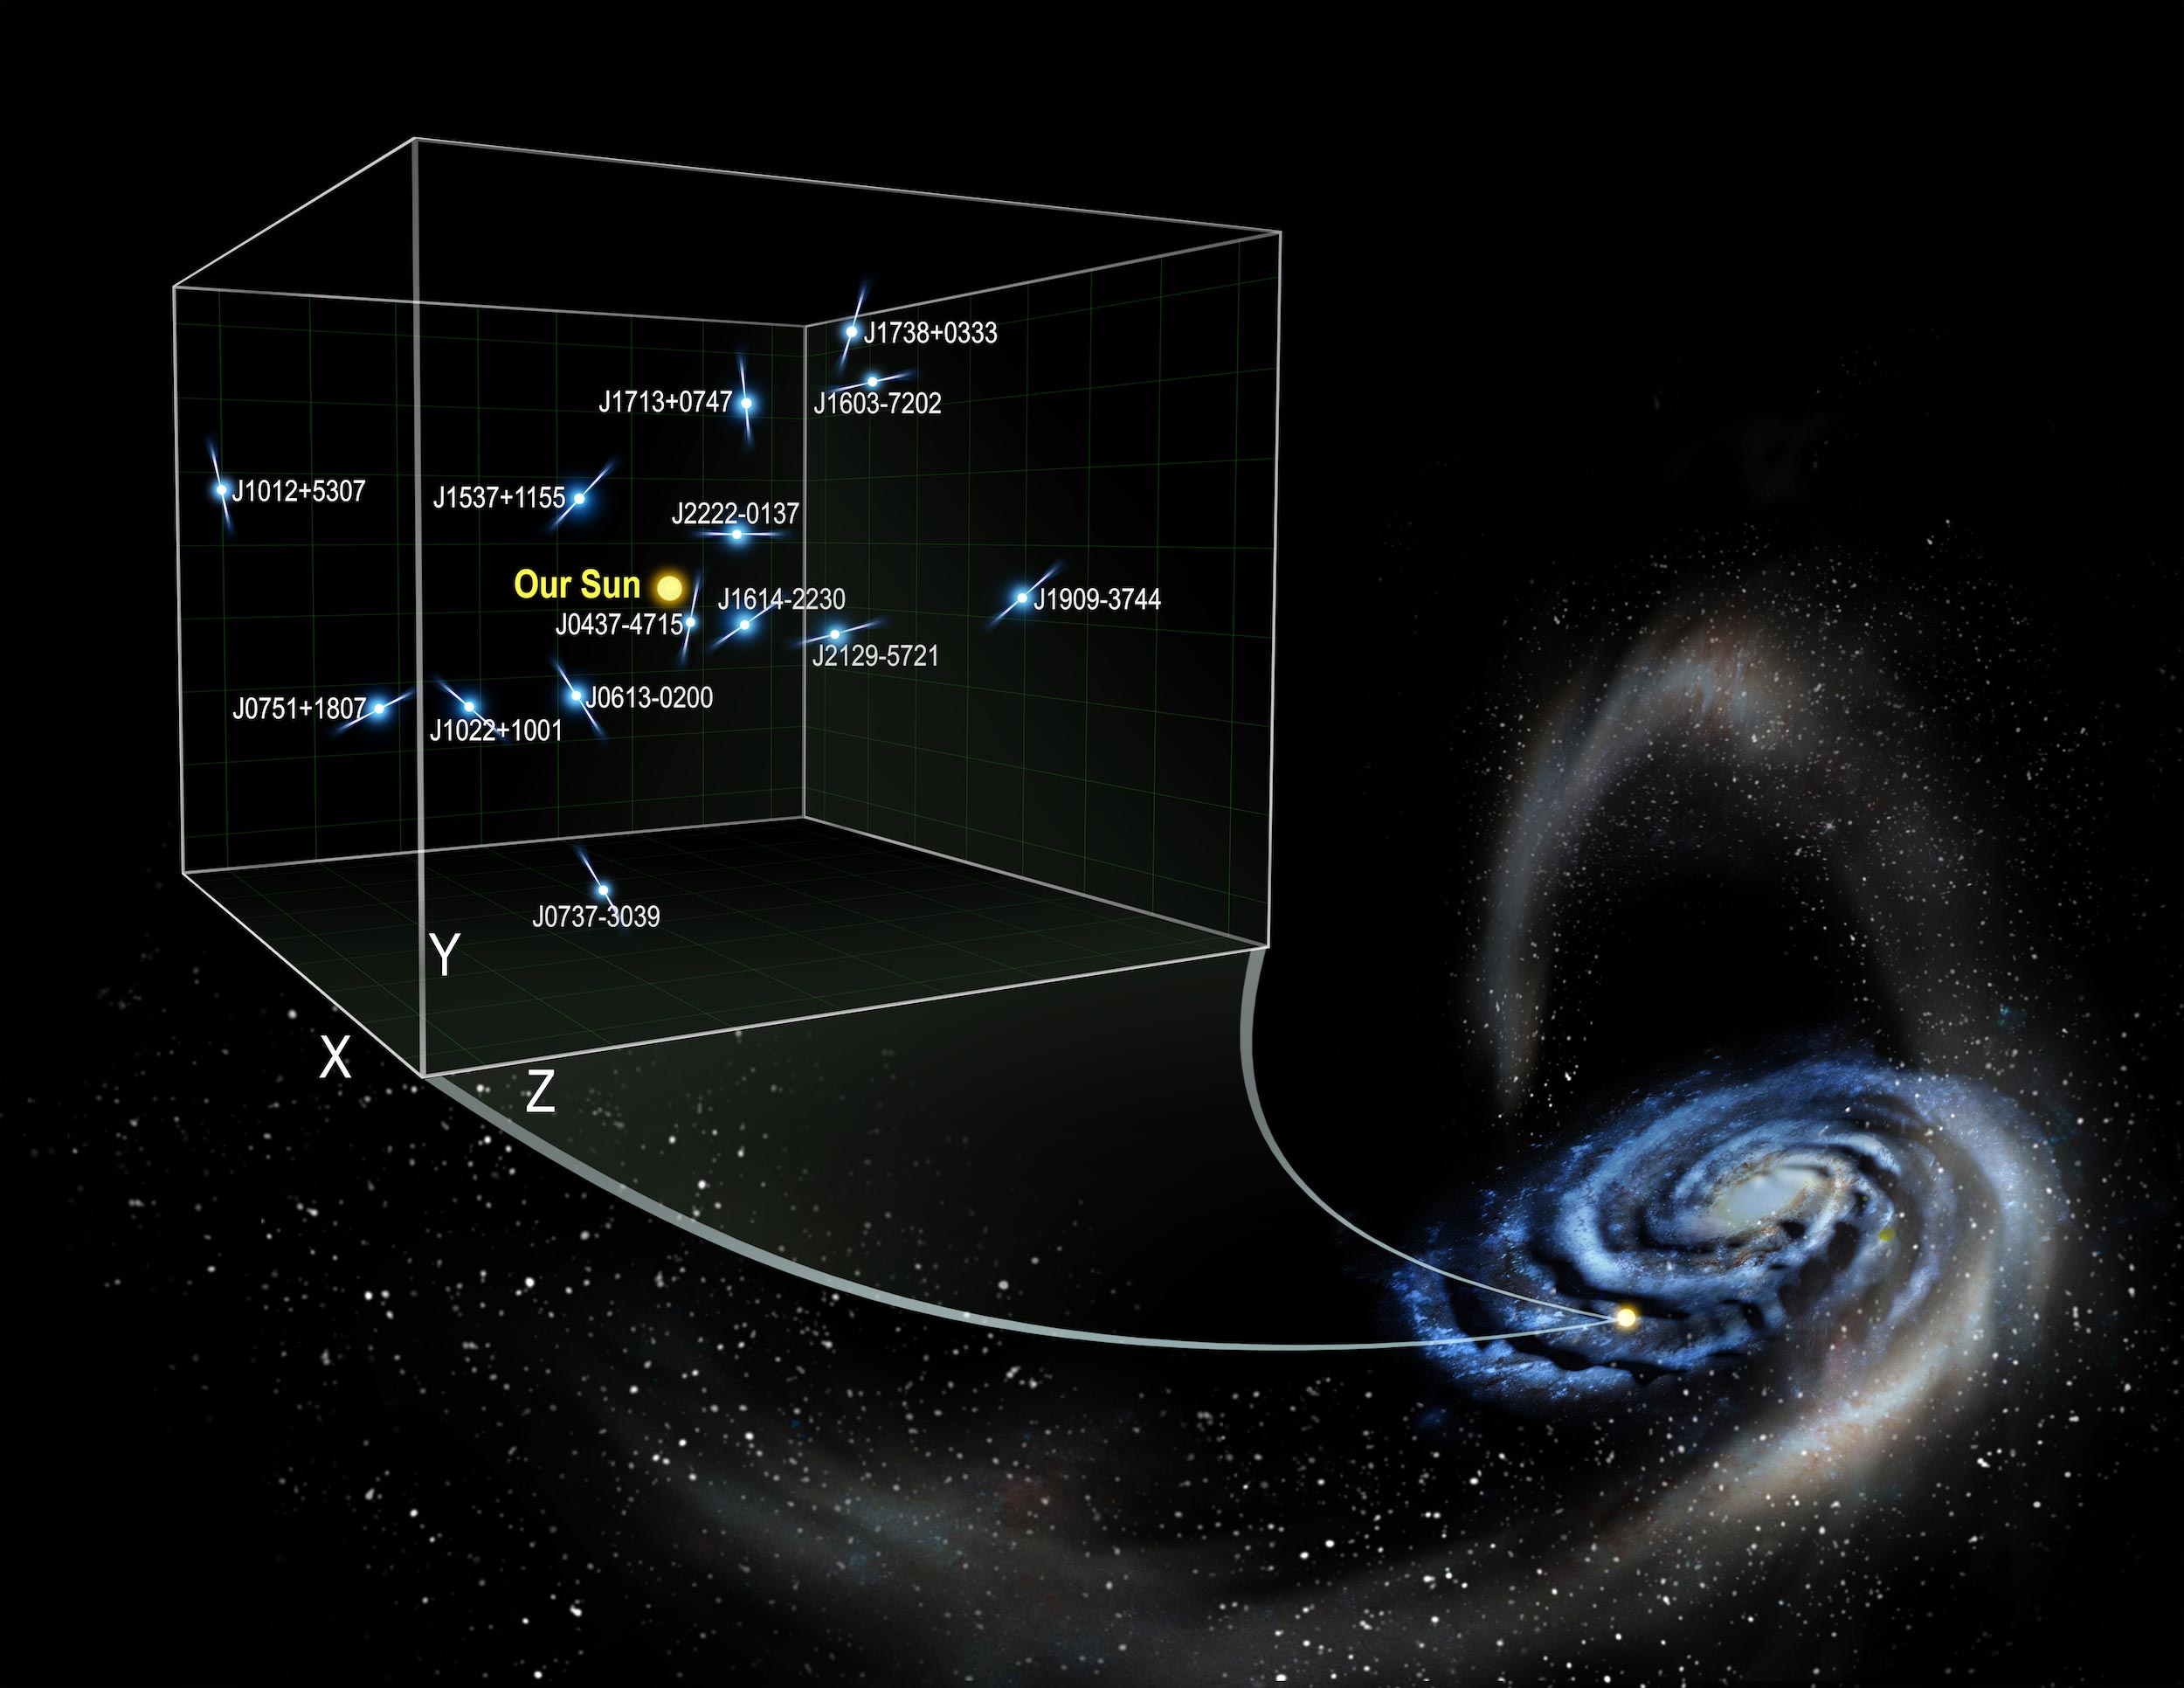 The Dark Side of the Milky Way was revealed by measurements of the pulsar acceleration